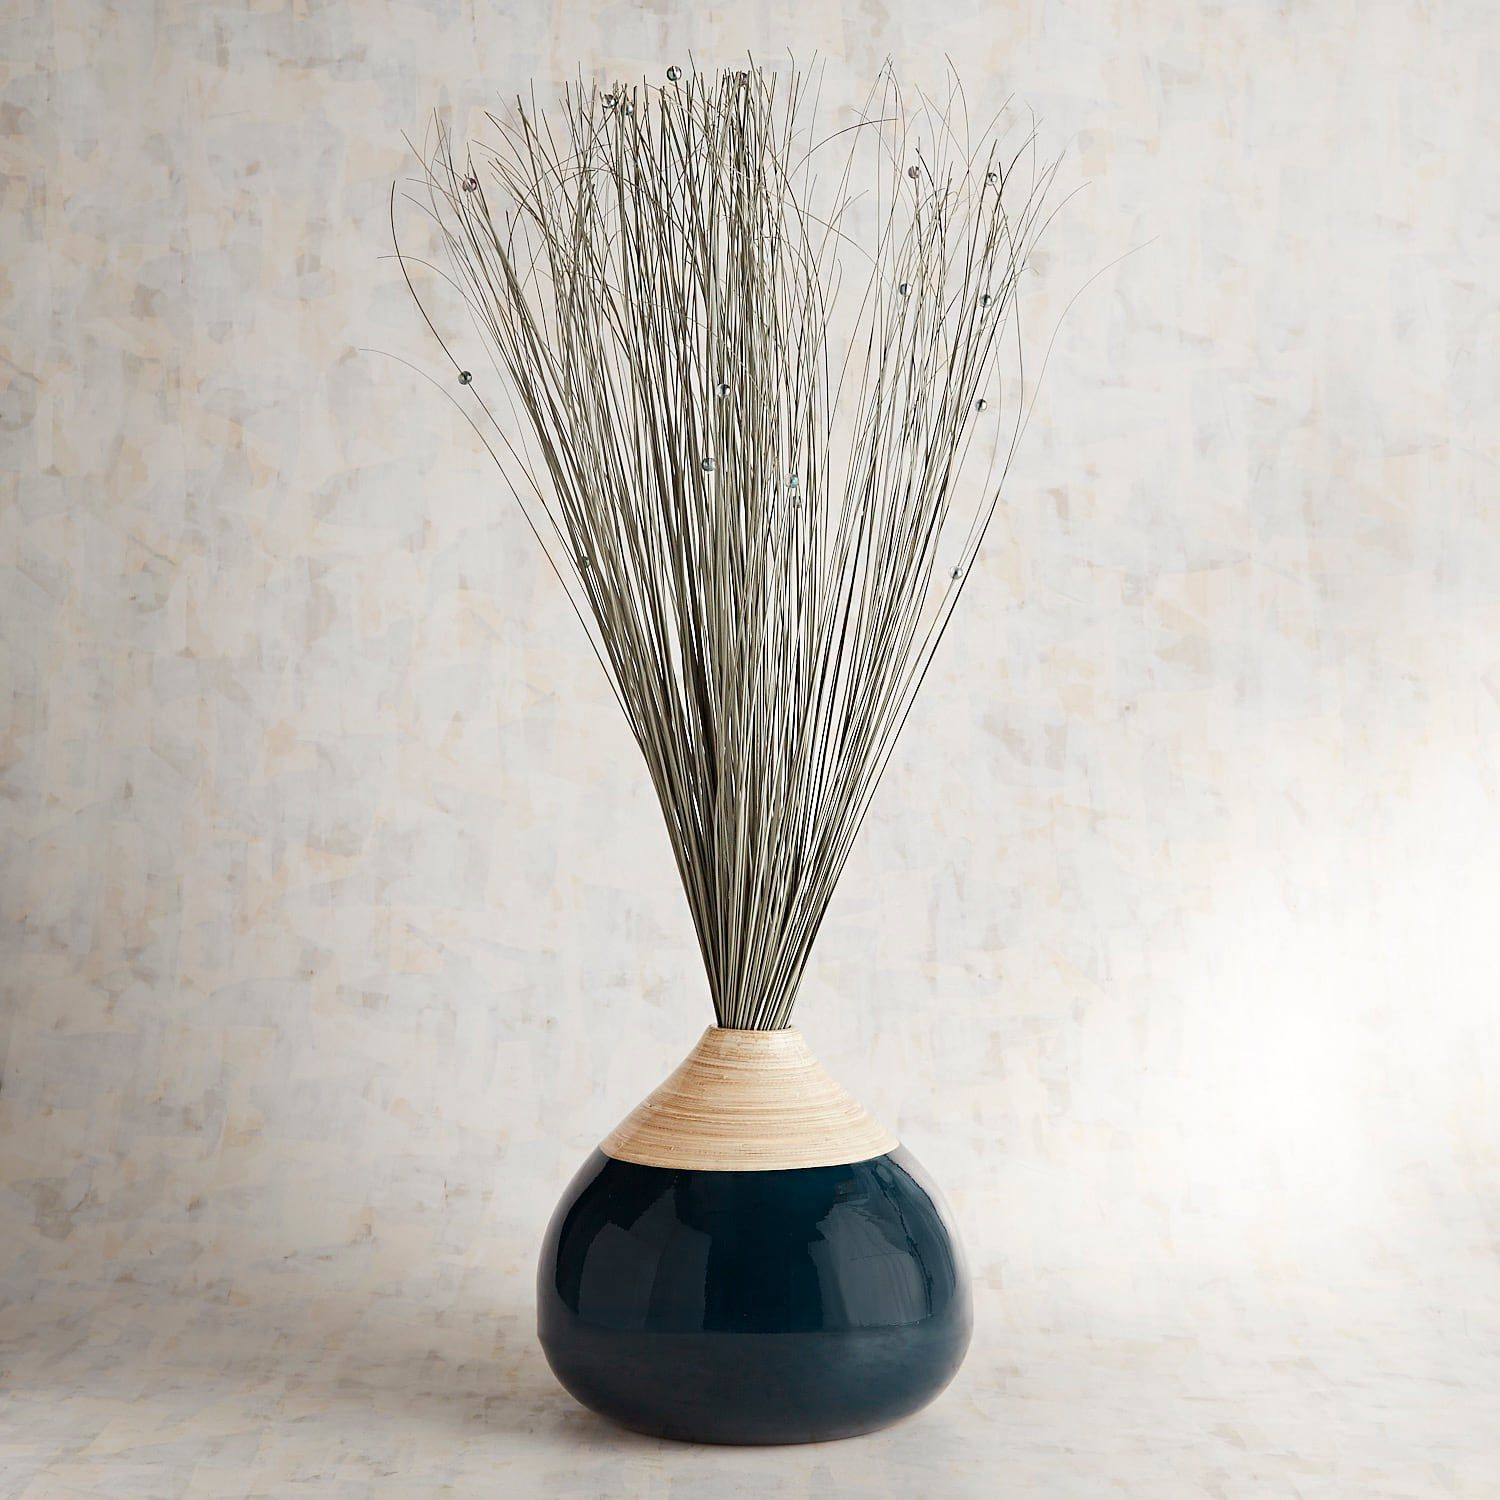 blue bamboo vase of gray navy ting in bamboo vase pinterest navy gray and palm with gray navy ting in bamboo vase